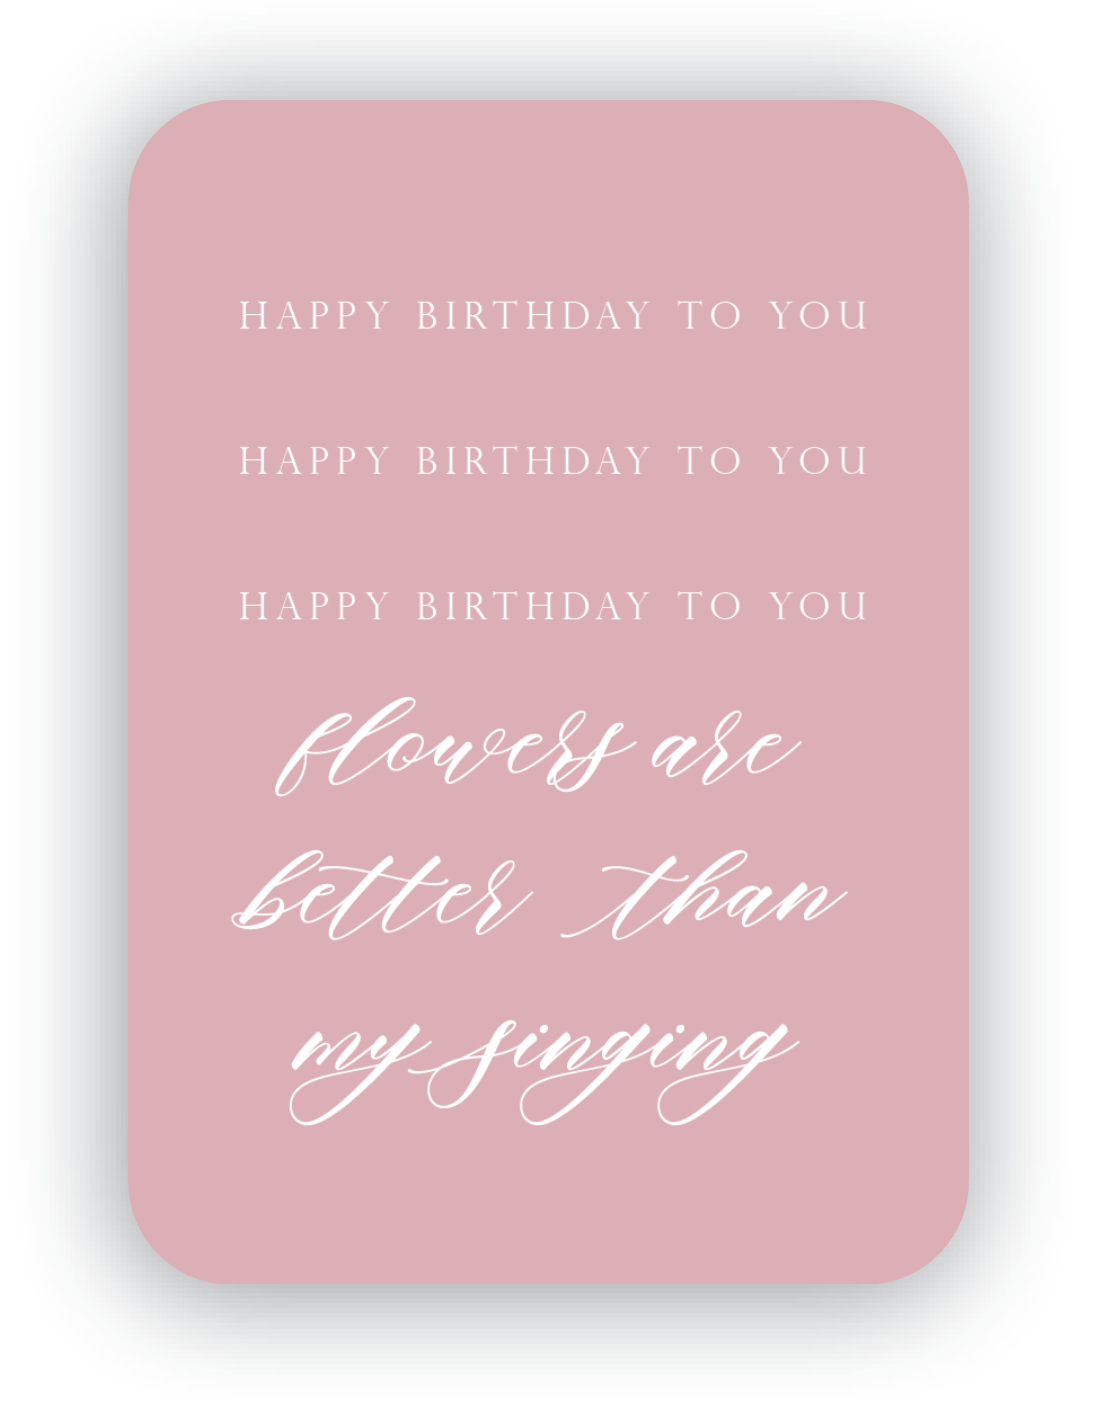 Digital blush mini card with florals that says "Happy birthday to you happy birthday to you happy birthday to you flowers are better than my singing" by Rust Belt Love